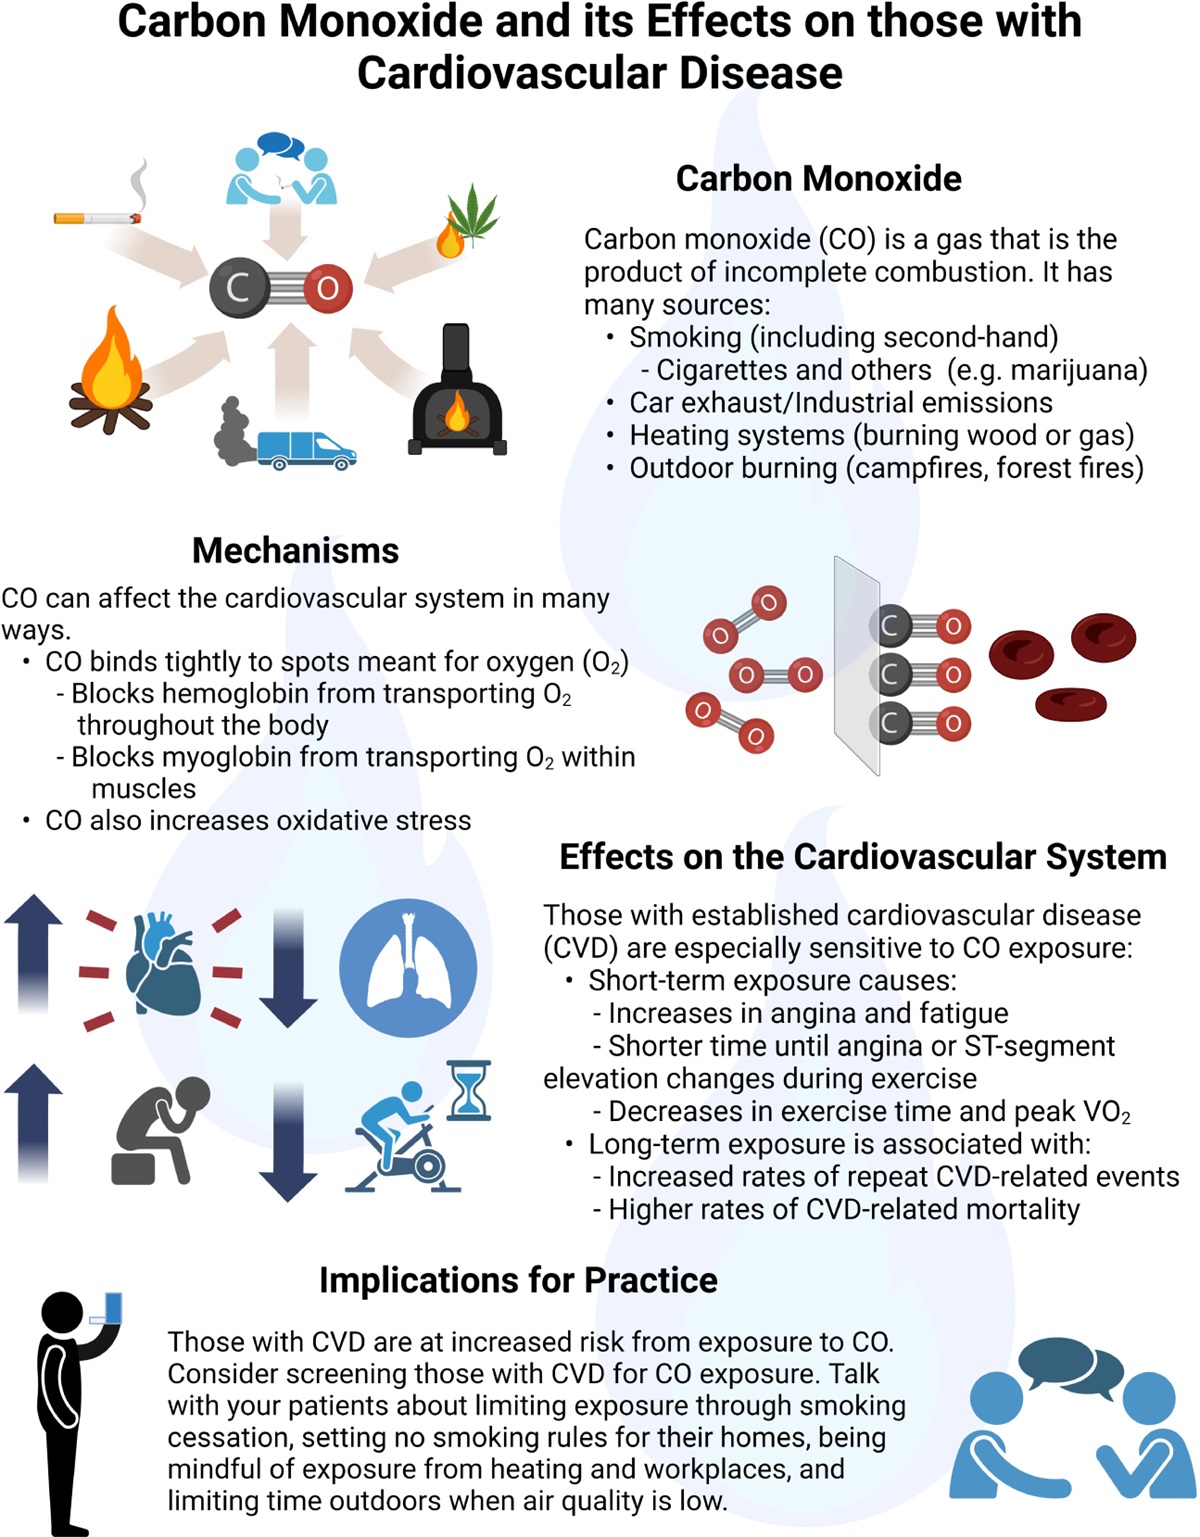 Carbon Monoxide and Its Effects on Those With Cardiovascular Disease